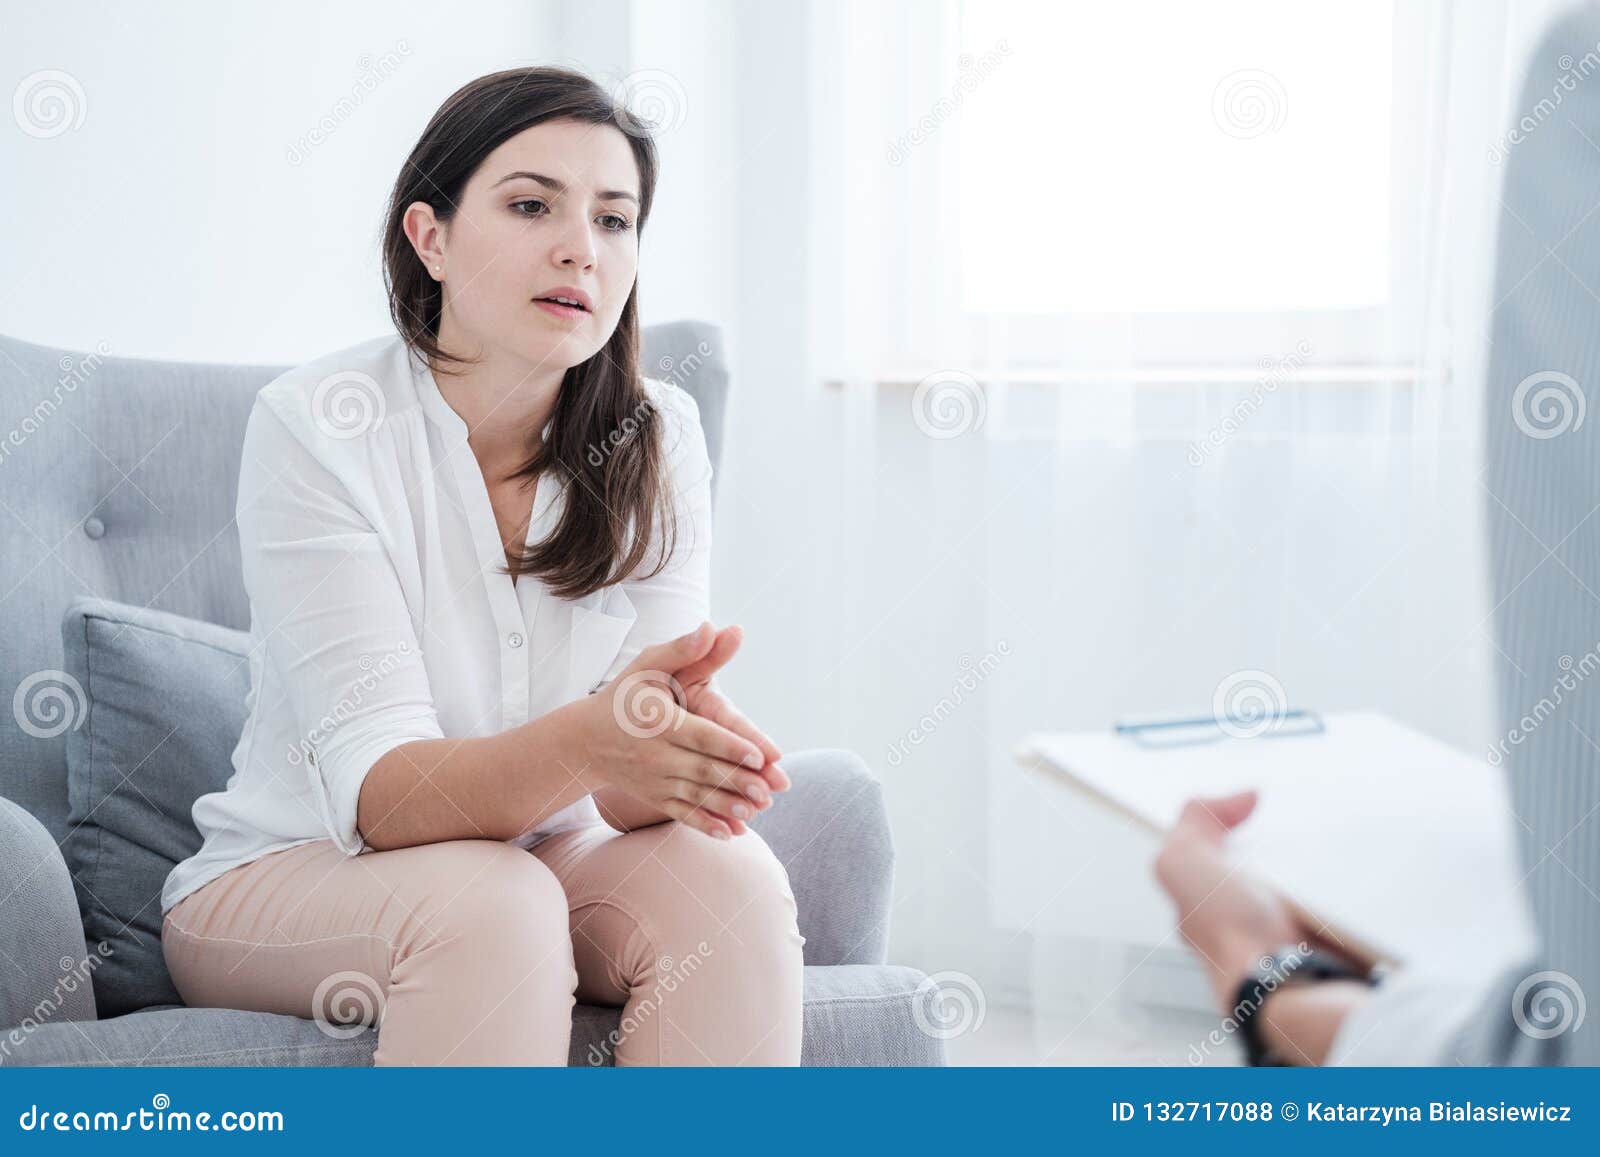 woman with problem talking to psychotherapist during therapy in the office